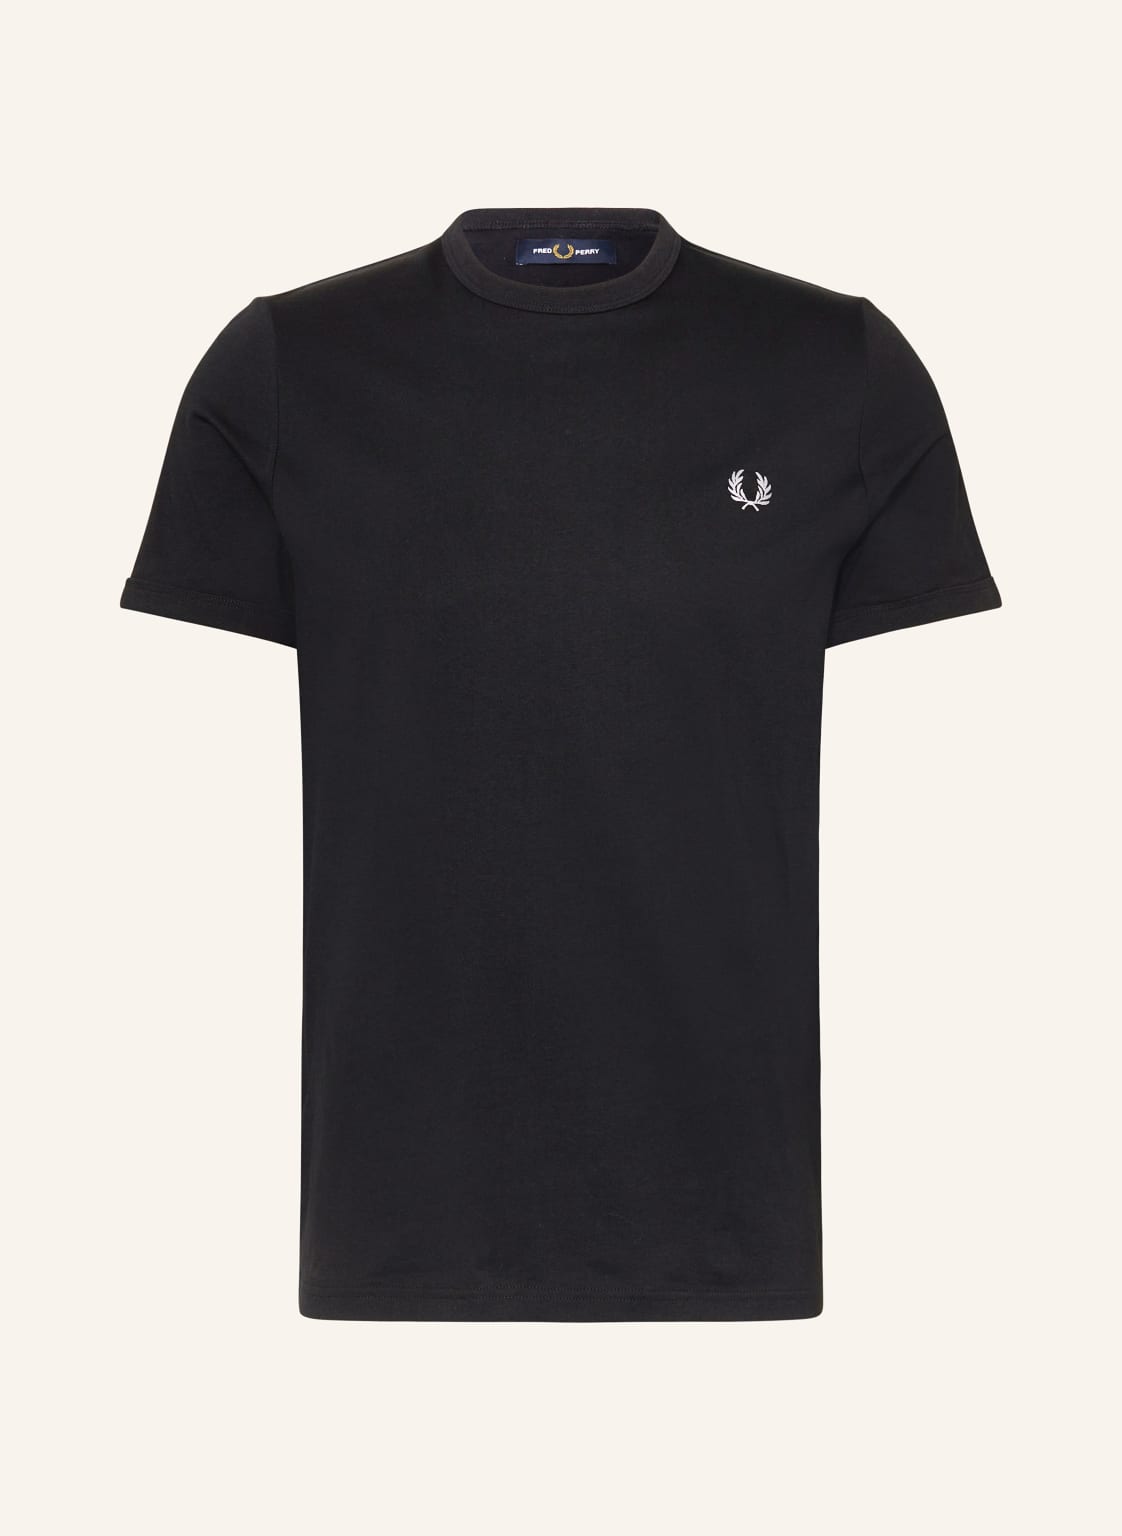 Fred Perry T-Shirt schwarz von Fred Perry